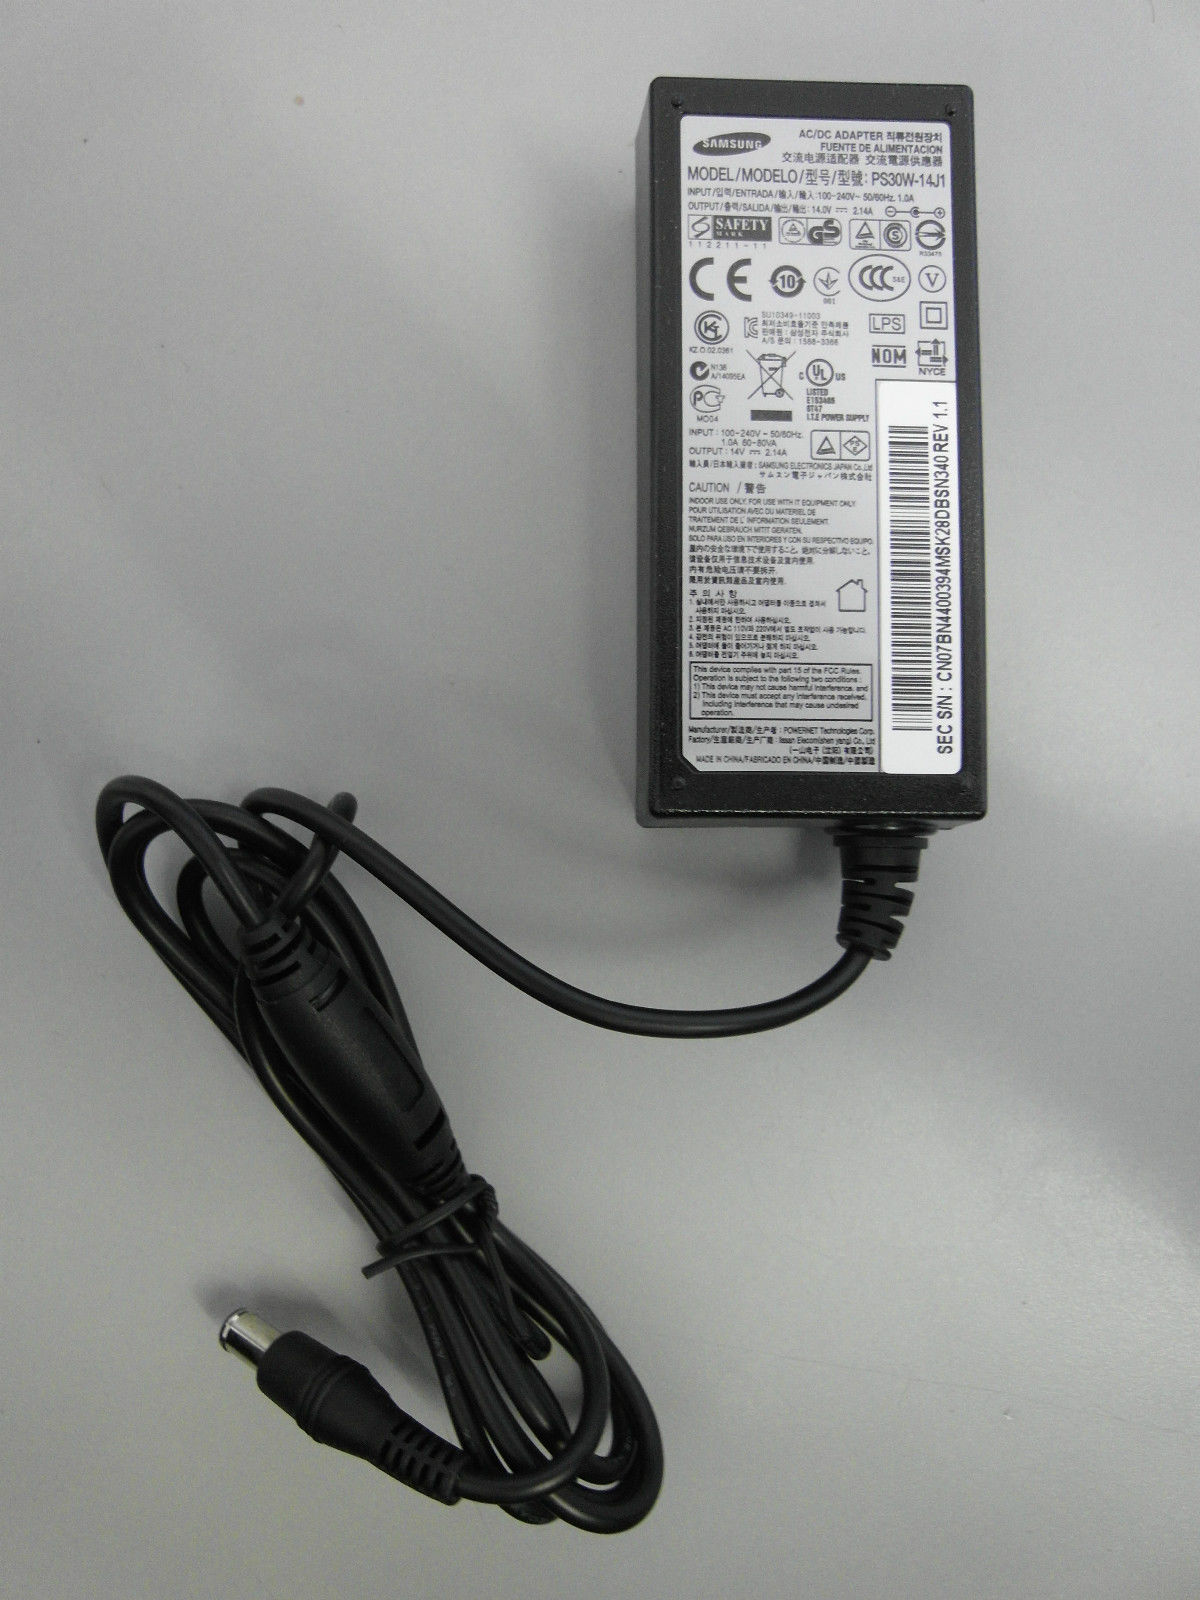 Genuine 14V 2.14A Samsung AC/DC Adapter for Samsung Monitors PS30W-14J1 AD-3014 AD